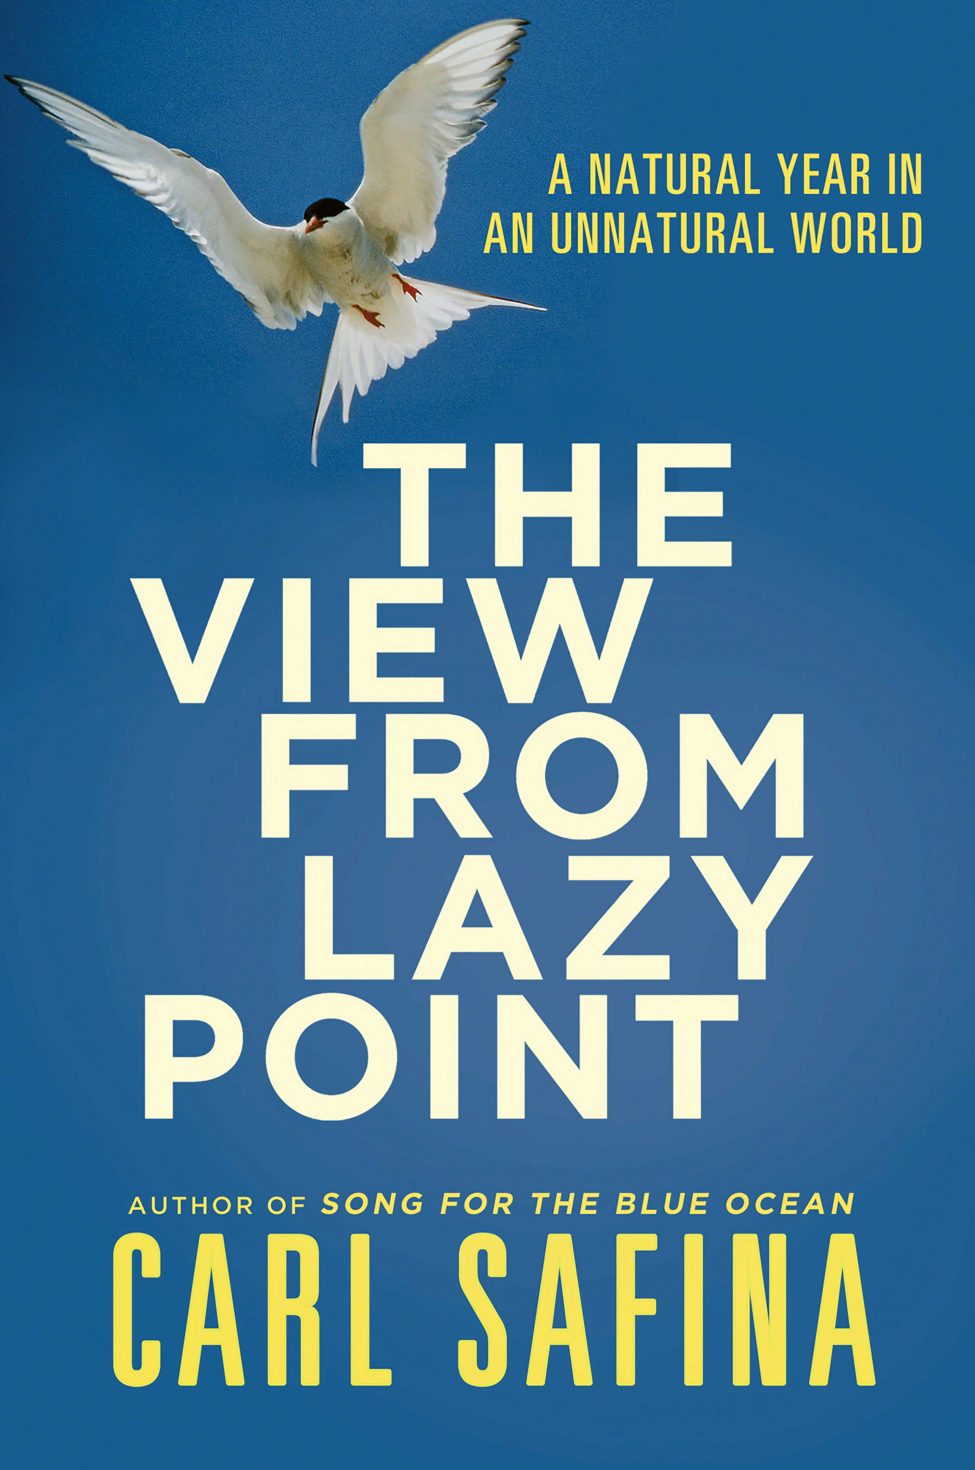 The View From Lazy Point: A Natural Year In An Unnatural World<br />
by Carl Safina<br />
Published by Henry Holt and Company, Inc.